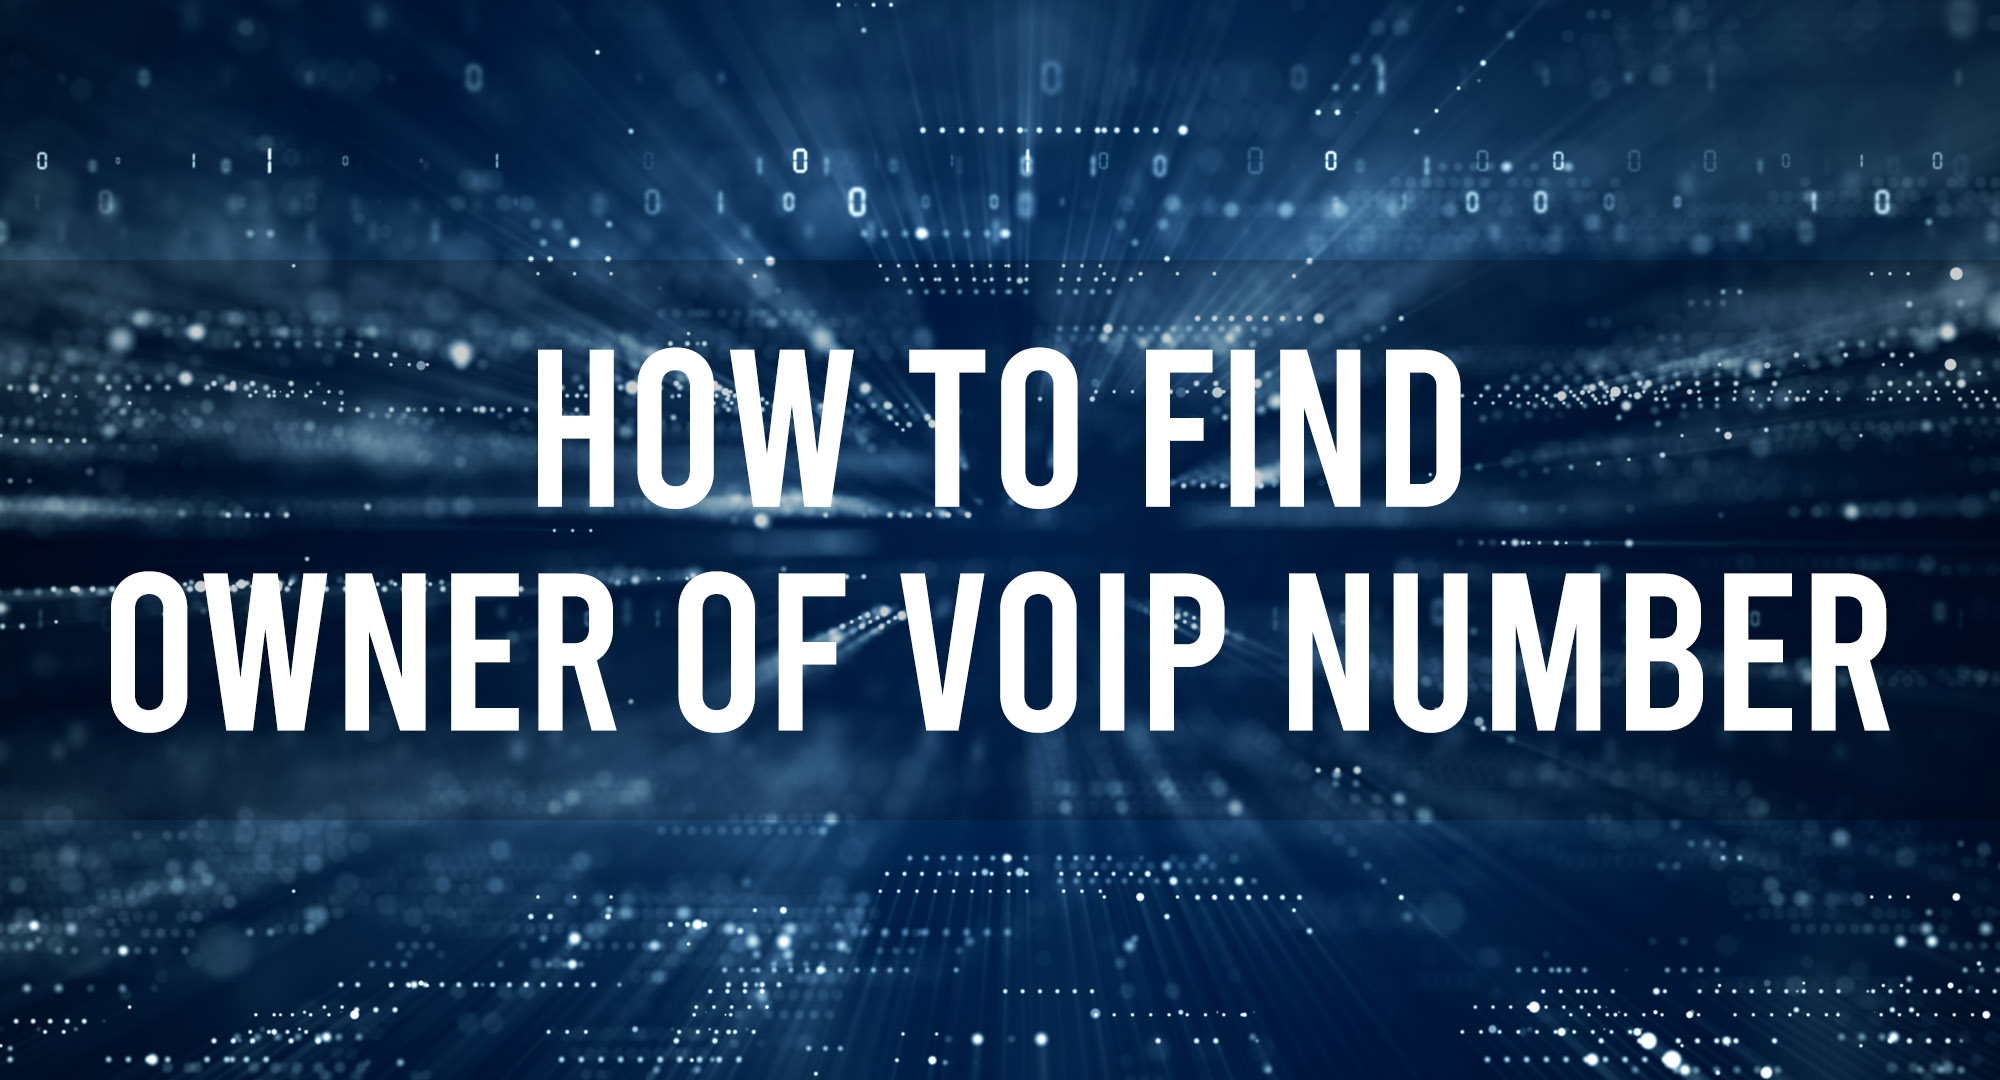 How to Find Owner of VoIP Number